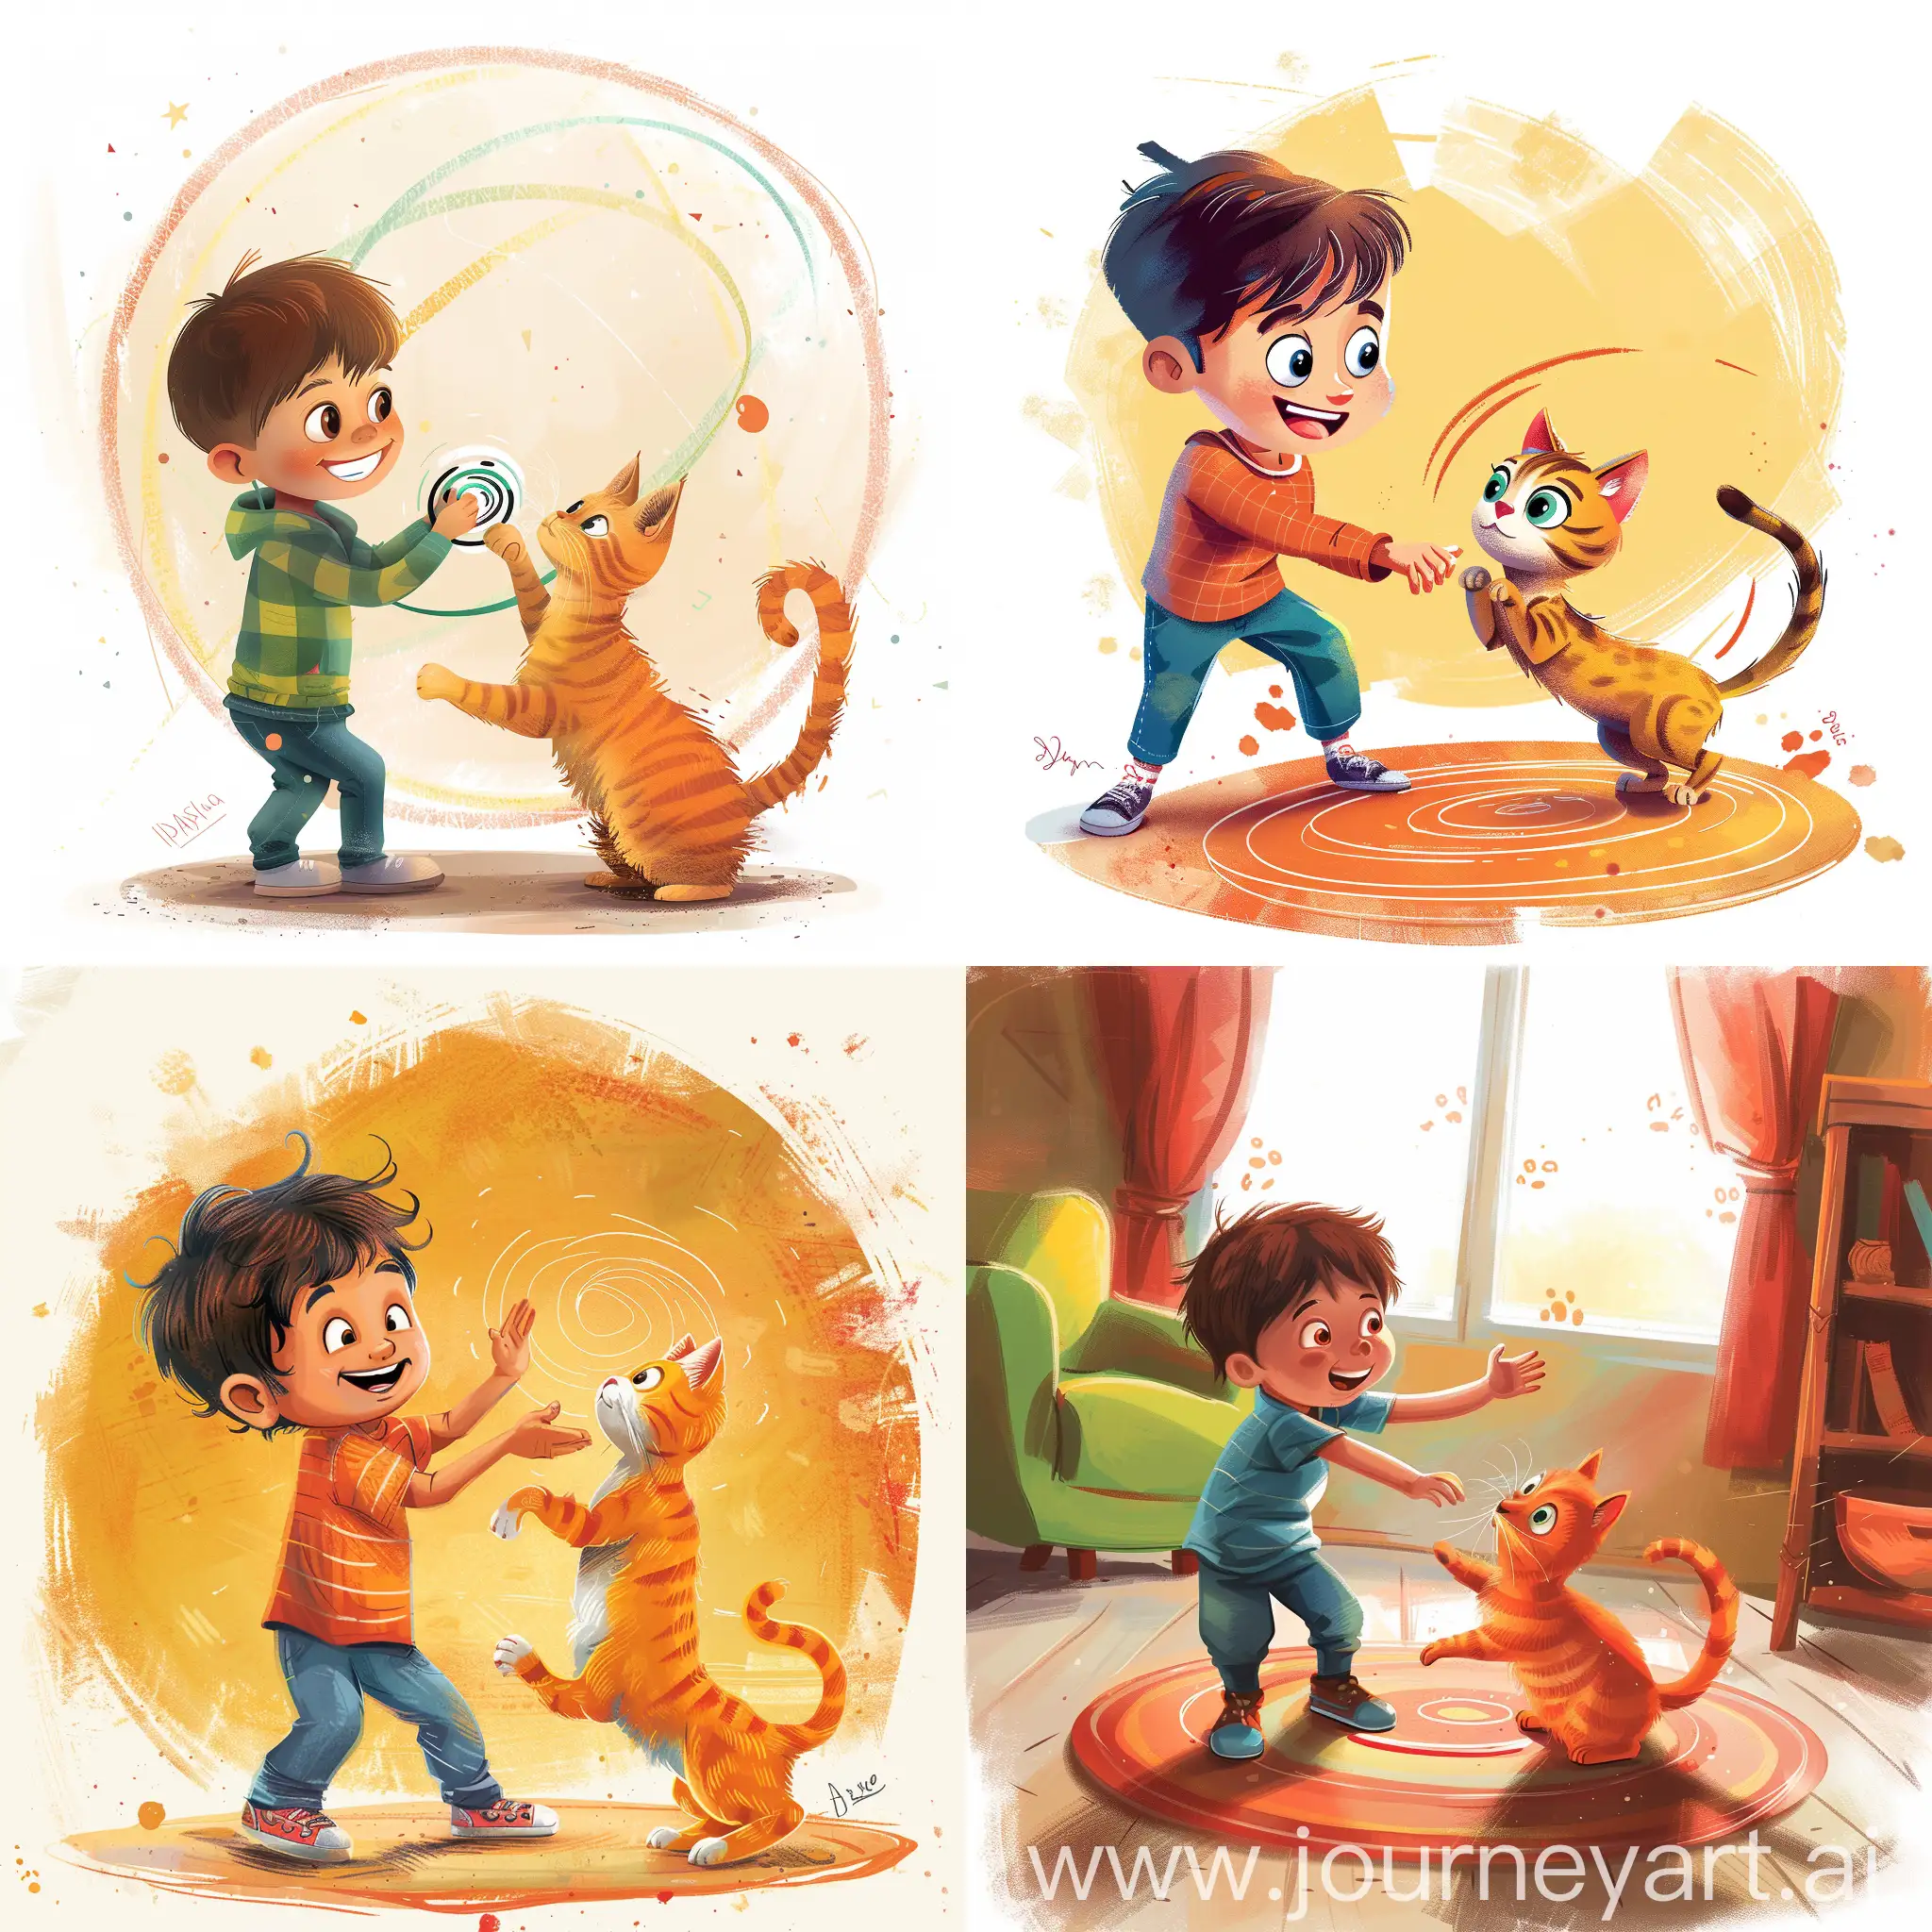 generate an illustration style of cute 4 years boy teaching his adorable cat how to spin in a circle. This illustration will be used for a children’s book expressive characters, vibrant colors, and whimsical elements that appeal to young readers